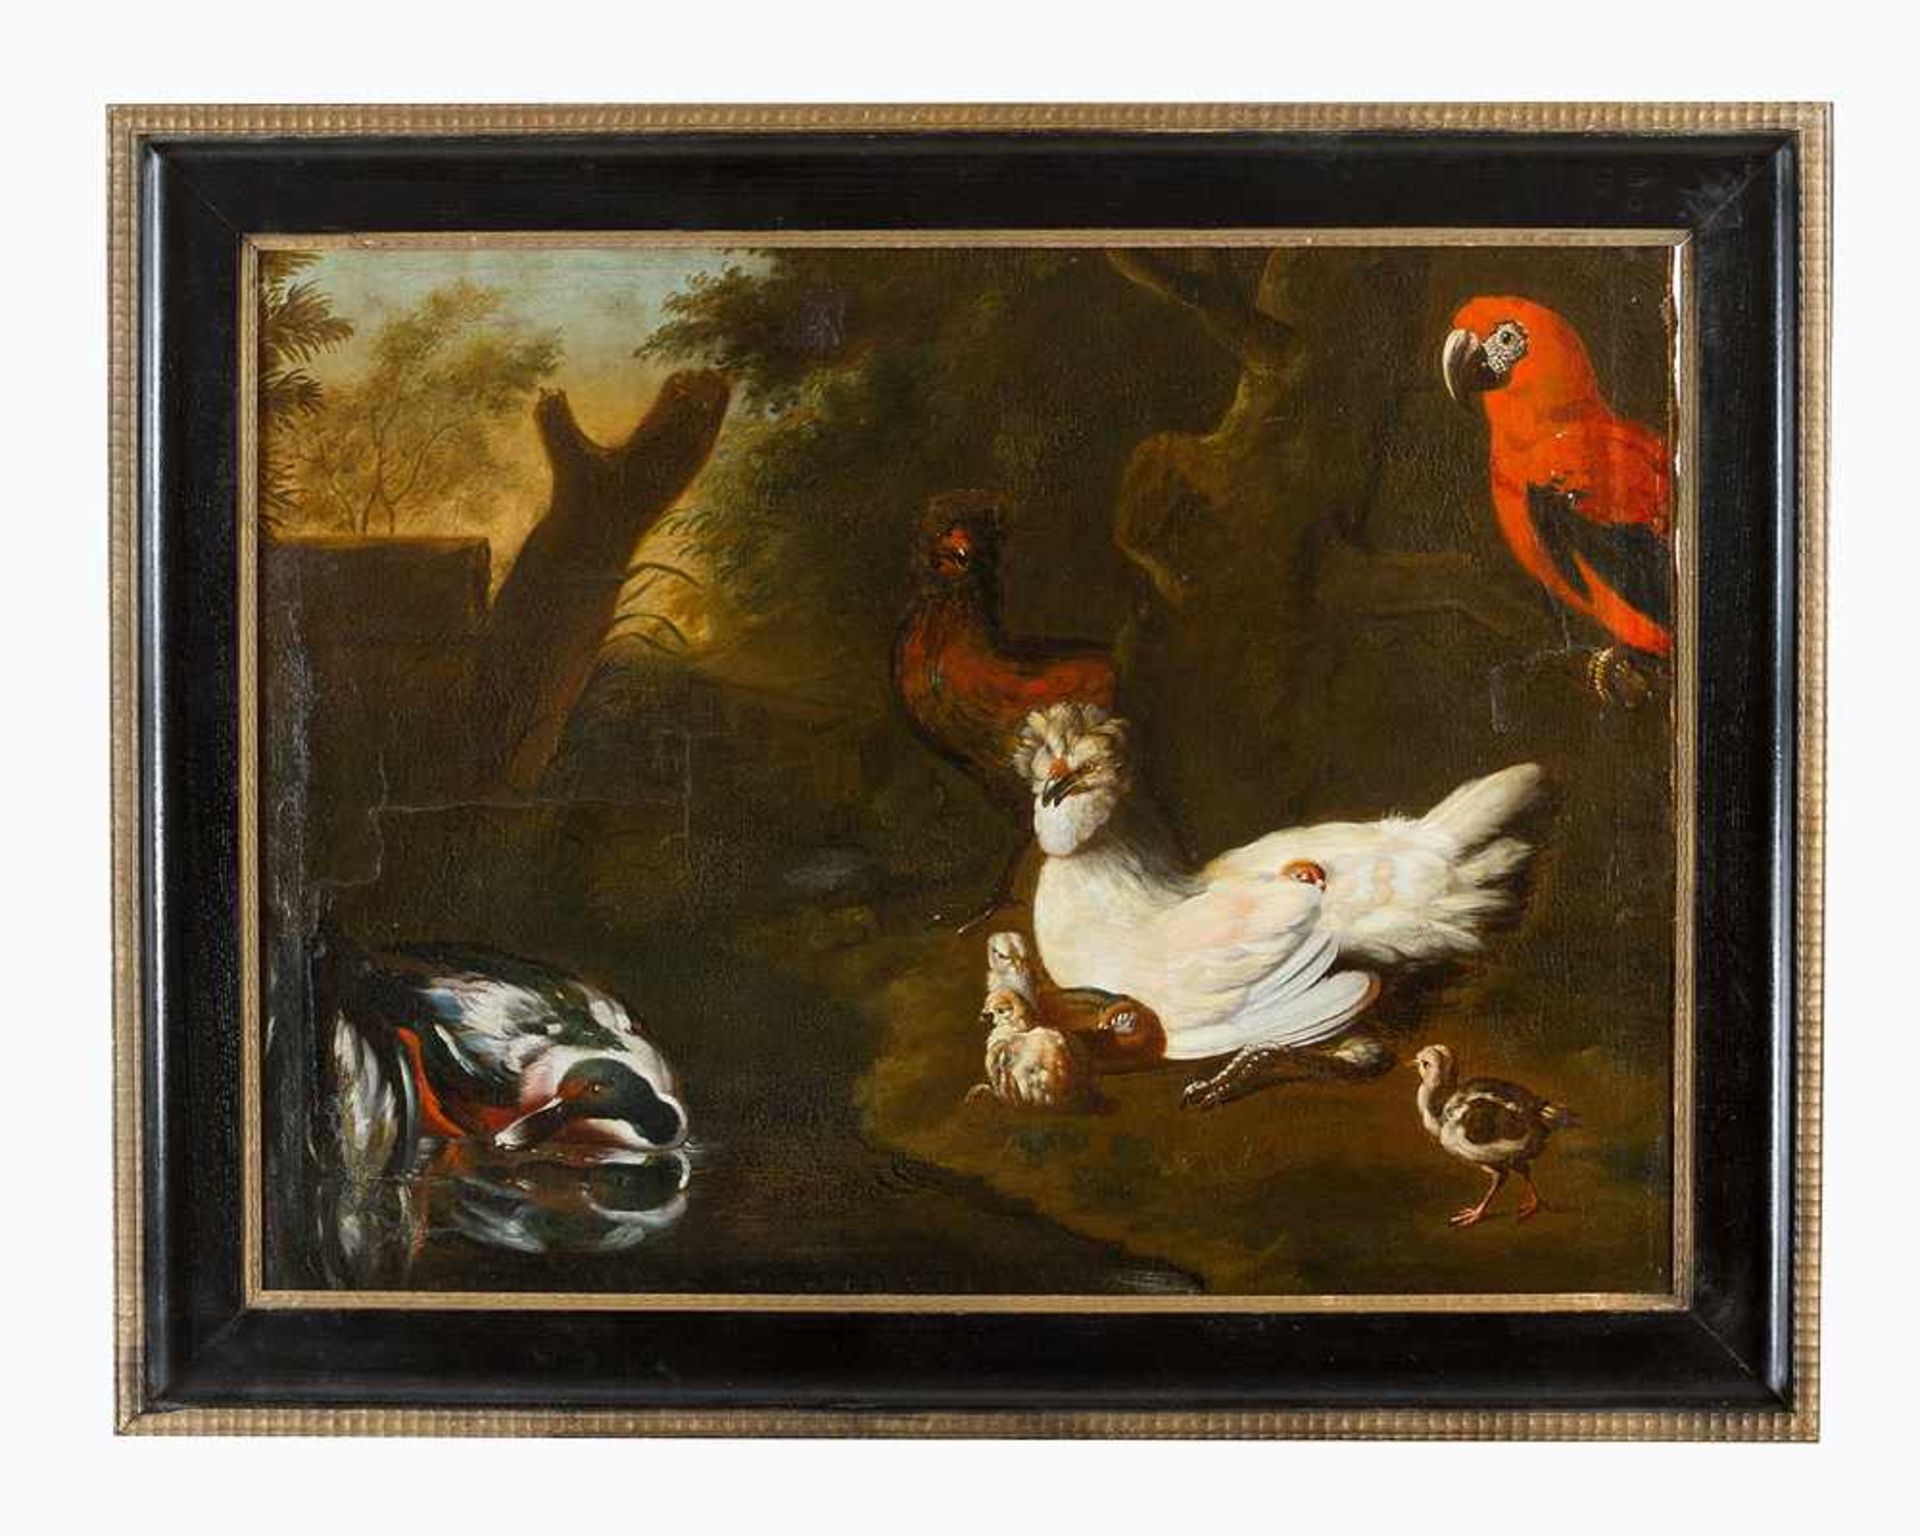 Tobias Stranover (1684-1756)-attributed, Birds in landscape, oil on canvas, framed.